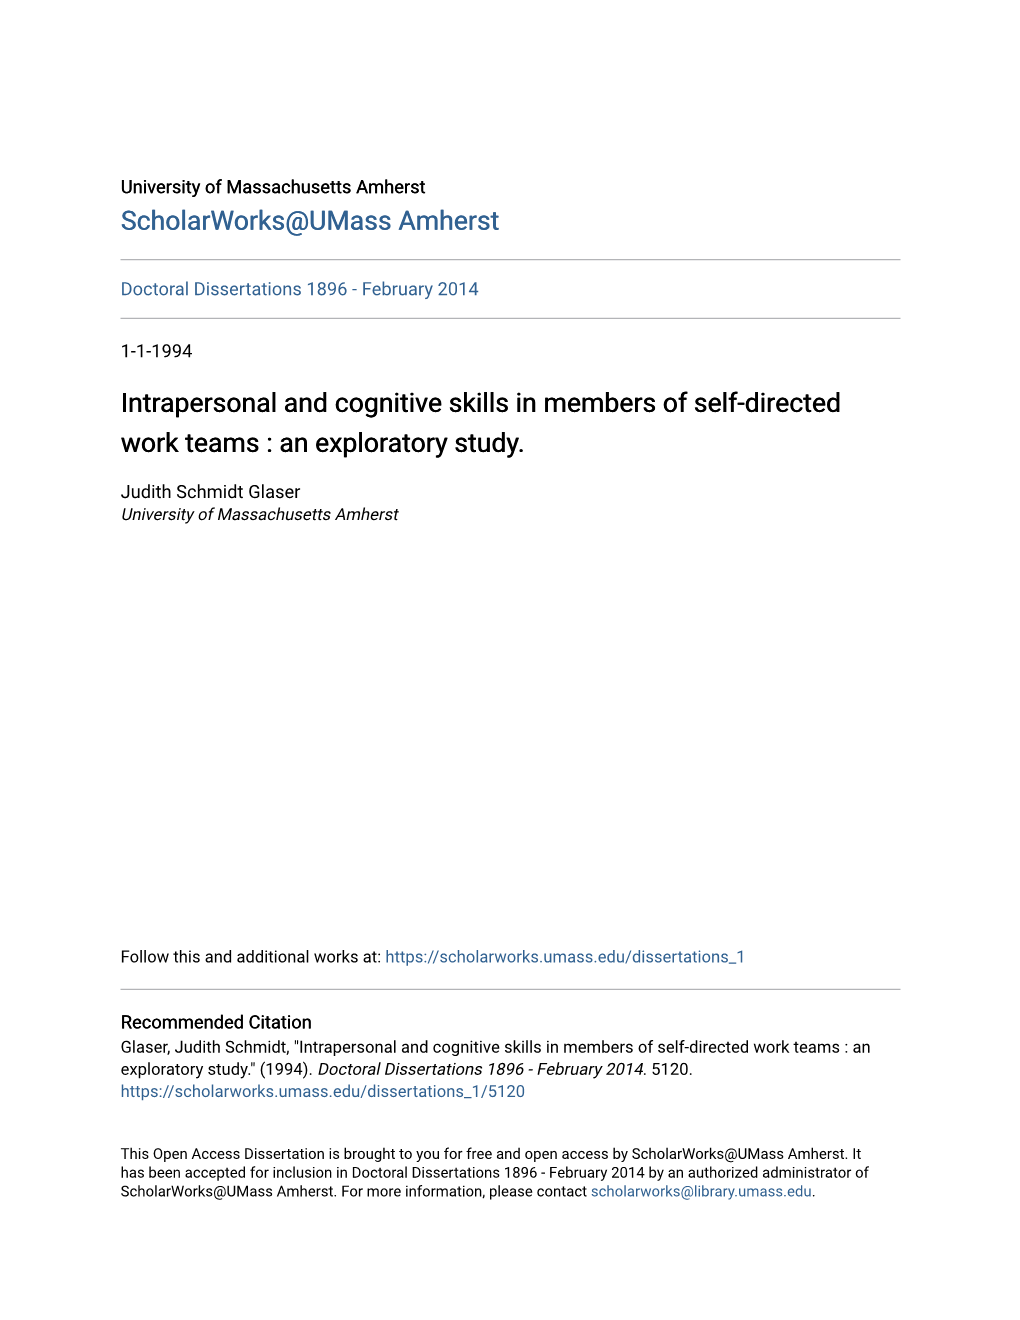 Intrapersonal and Cognitive Skills in Members of Self-Directed Work Teams : an Exploratory Study